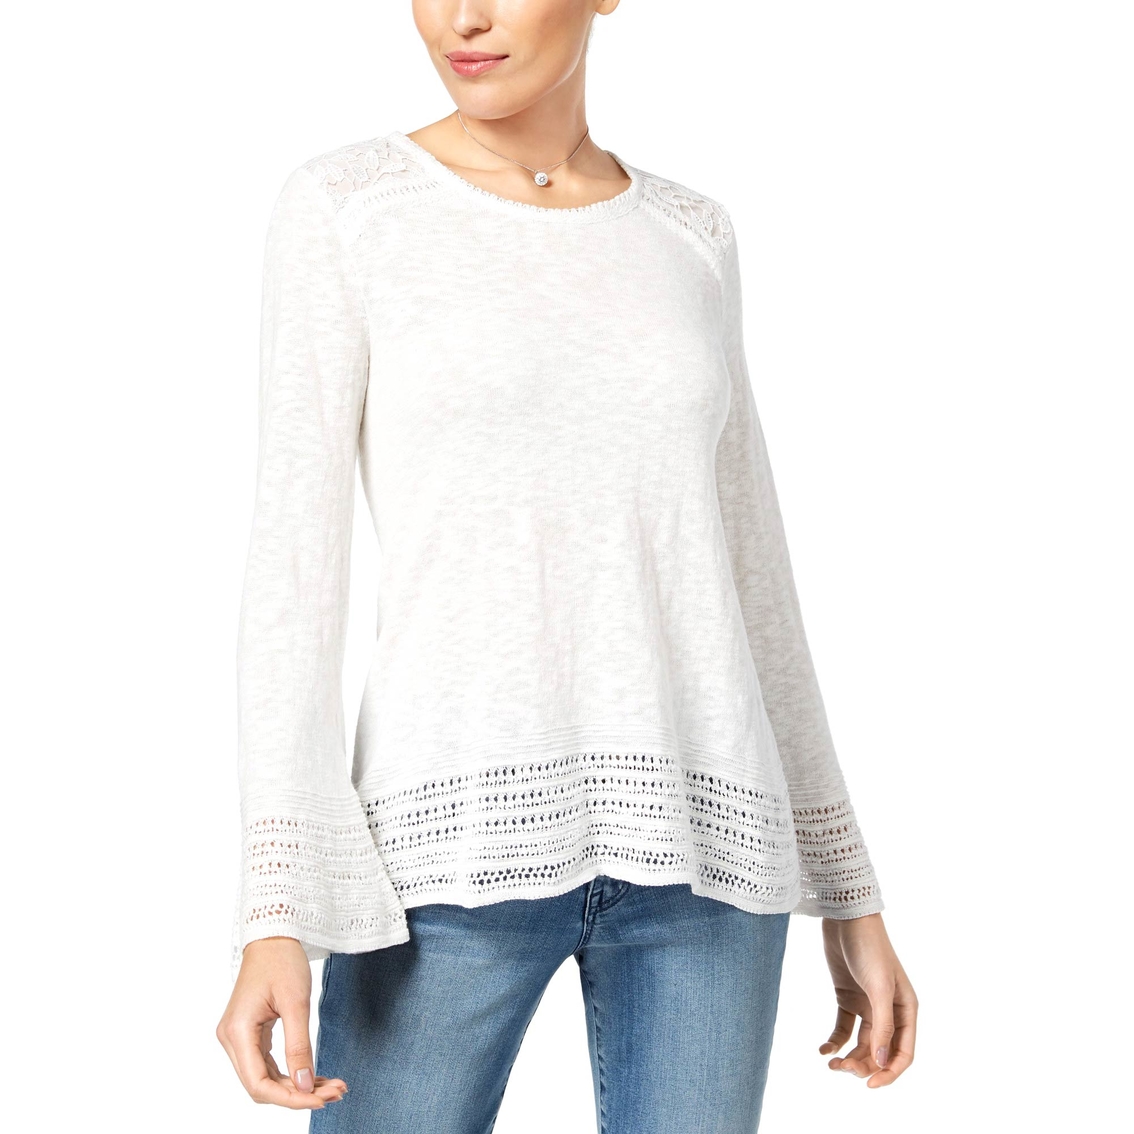 Style & Co. Crochet Trim Sweater | Sweaters | Clothing & Accessories ...